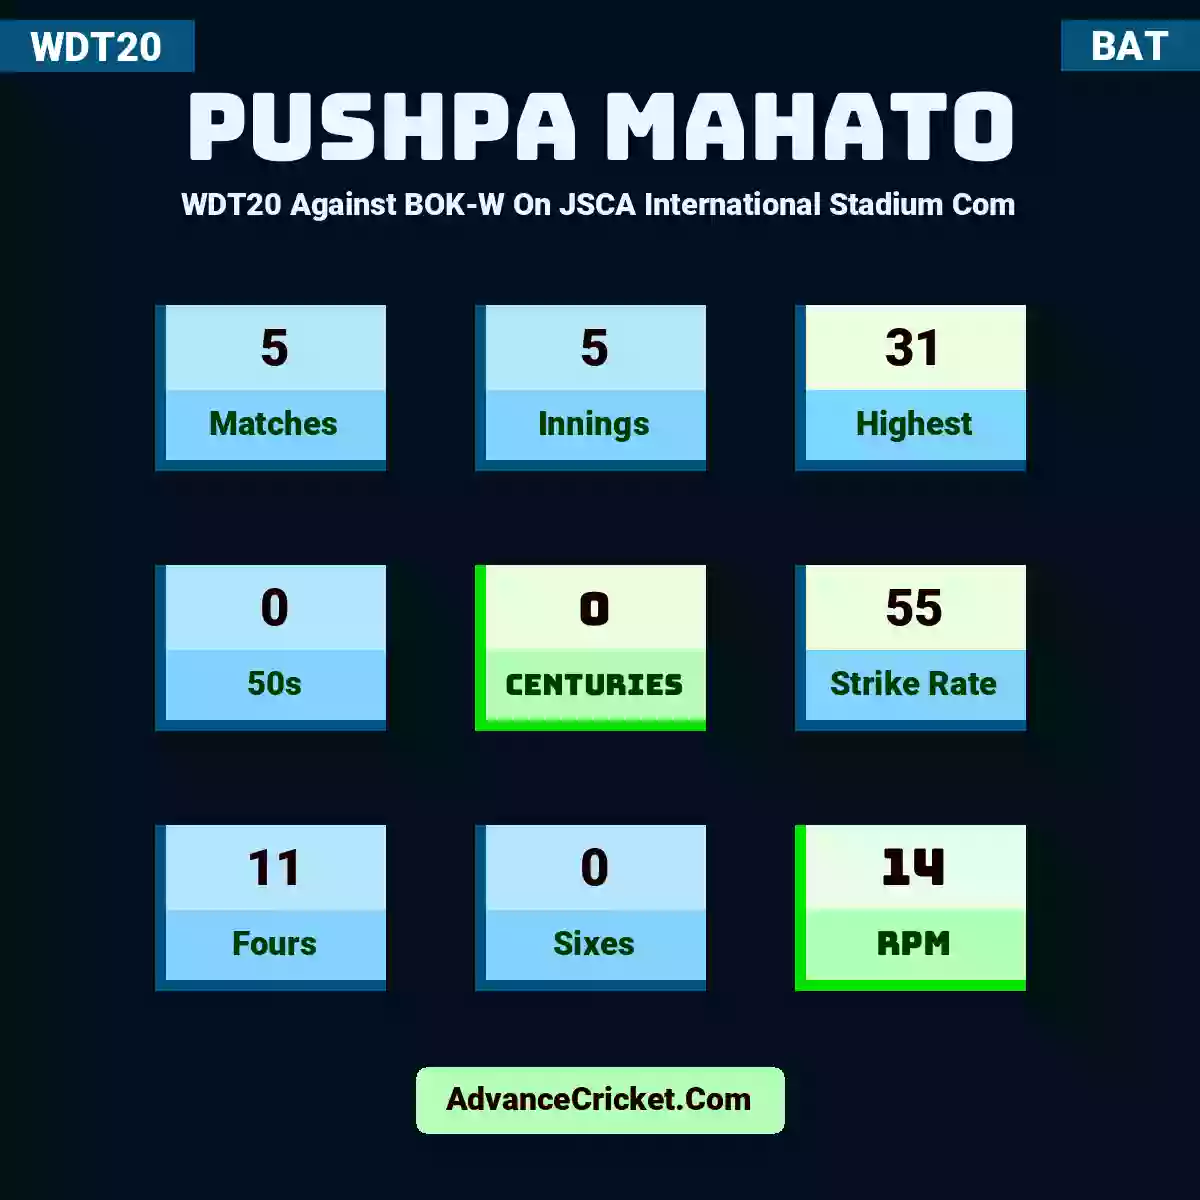 Pushpa Mahato WDT20  Against BOK-W On JSCA International Stadium Com, Pushpa Mahato played 5 matches, scored 31 runs as highest, 0 half-centuries, and 0 centuries, with a strike rate of 55. P.Mahato hit 11 fours and 0 sixes, with an RPM of 14.